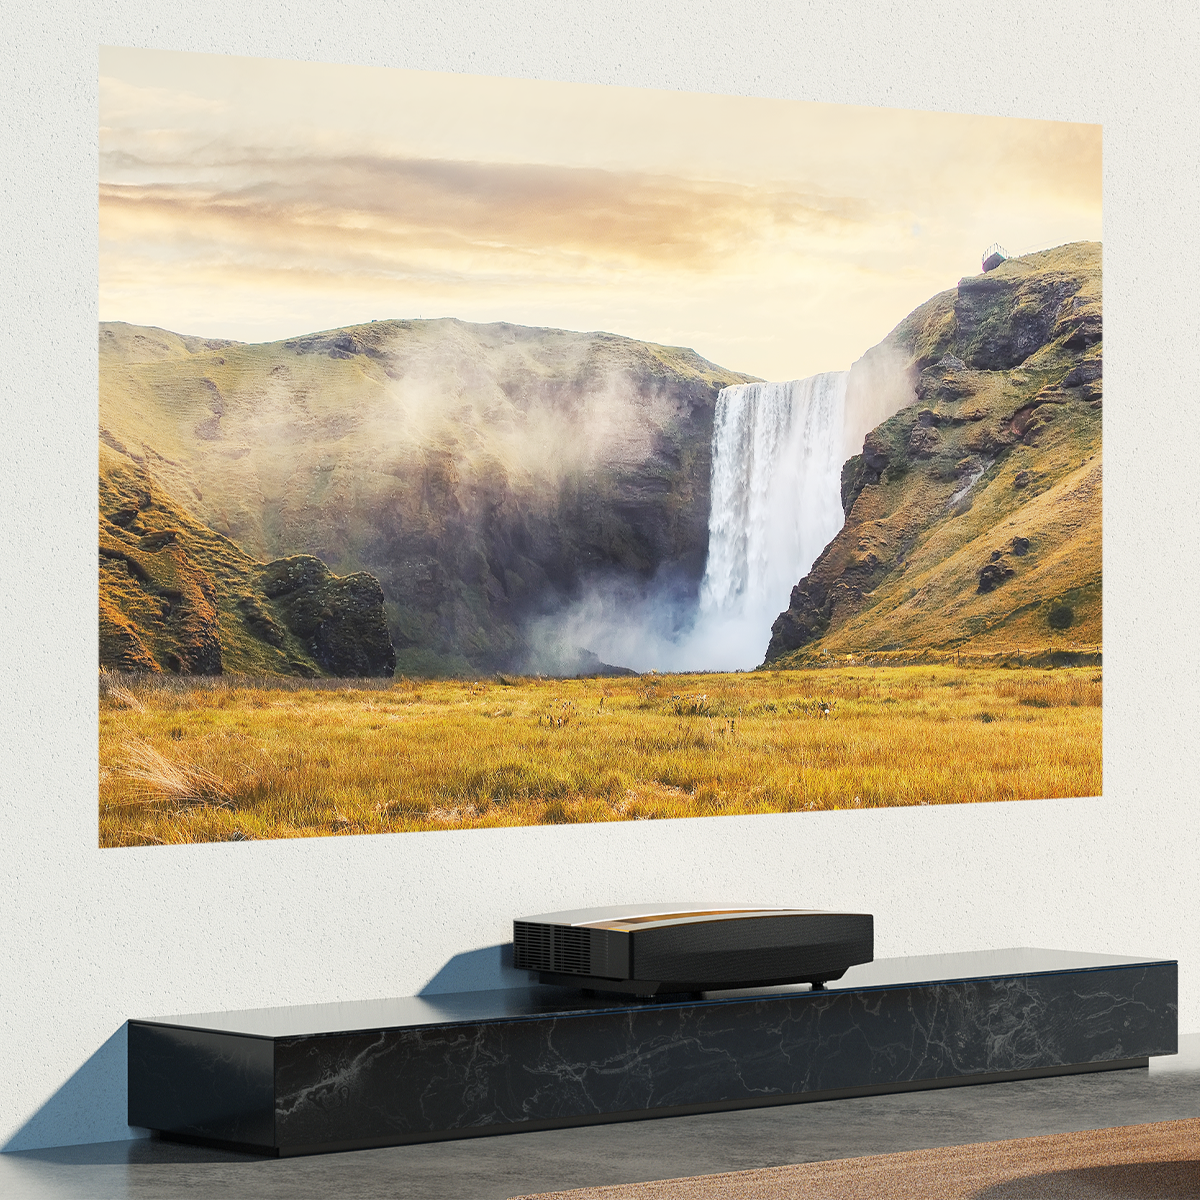 XGIMI AURA review: The ultimate 4K ultra short throw laser projector